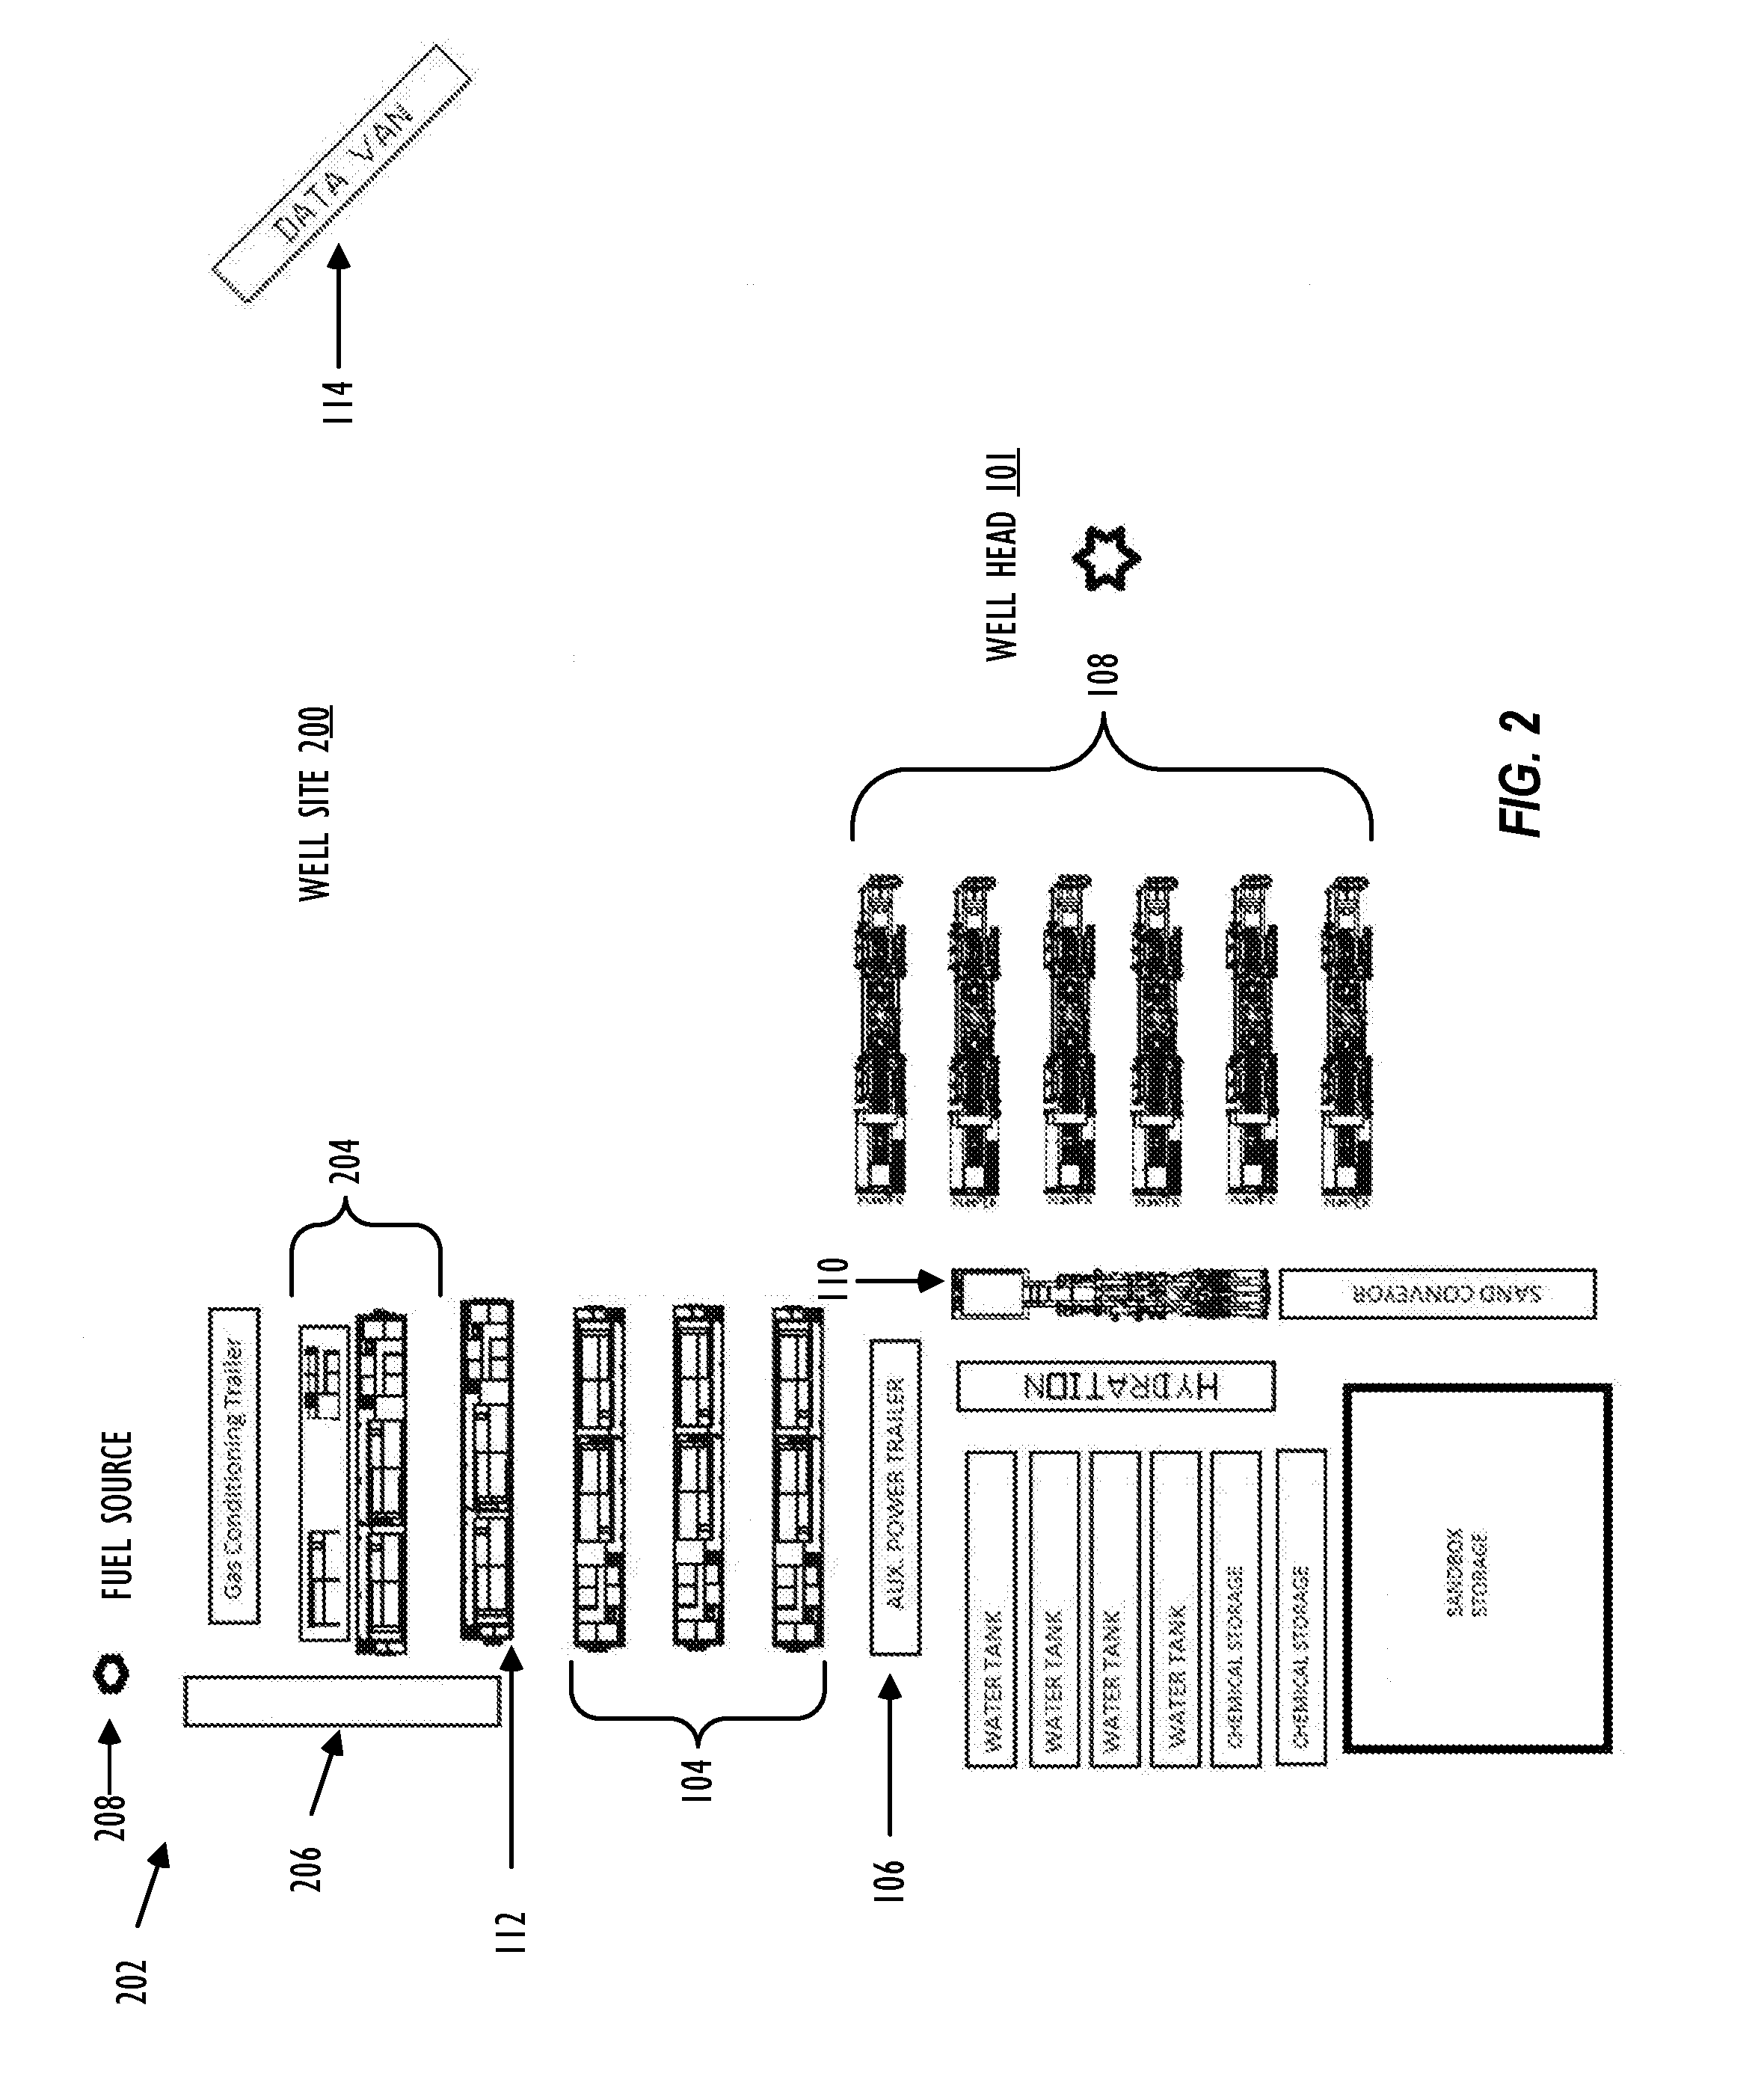 Mobile fracturing pump transport for hydraulic fracturing of subsurface geological formations